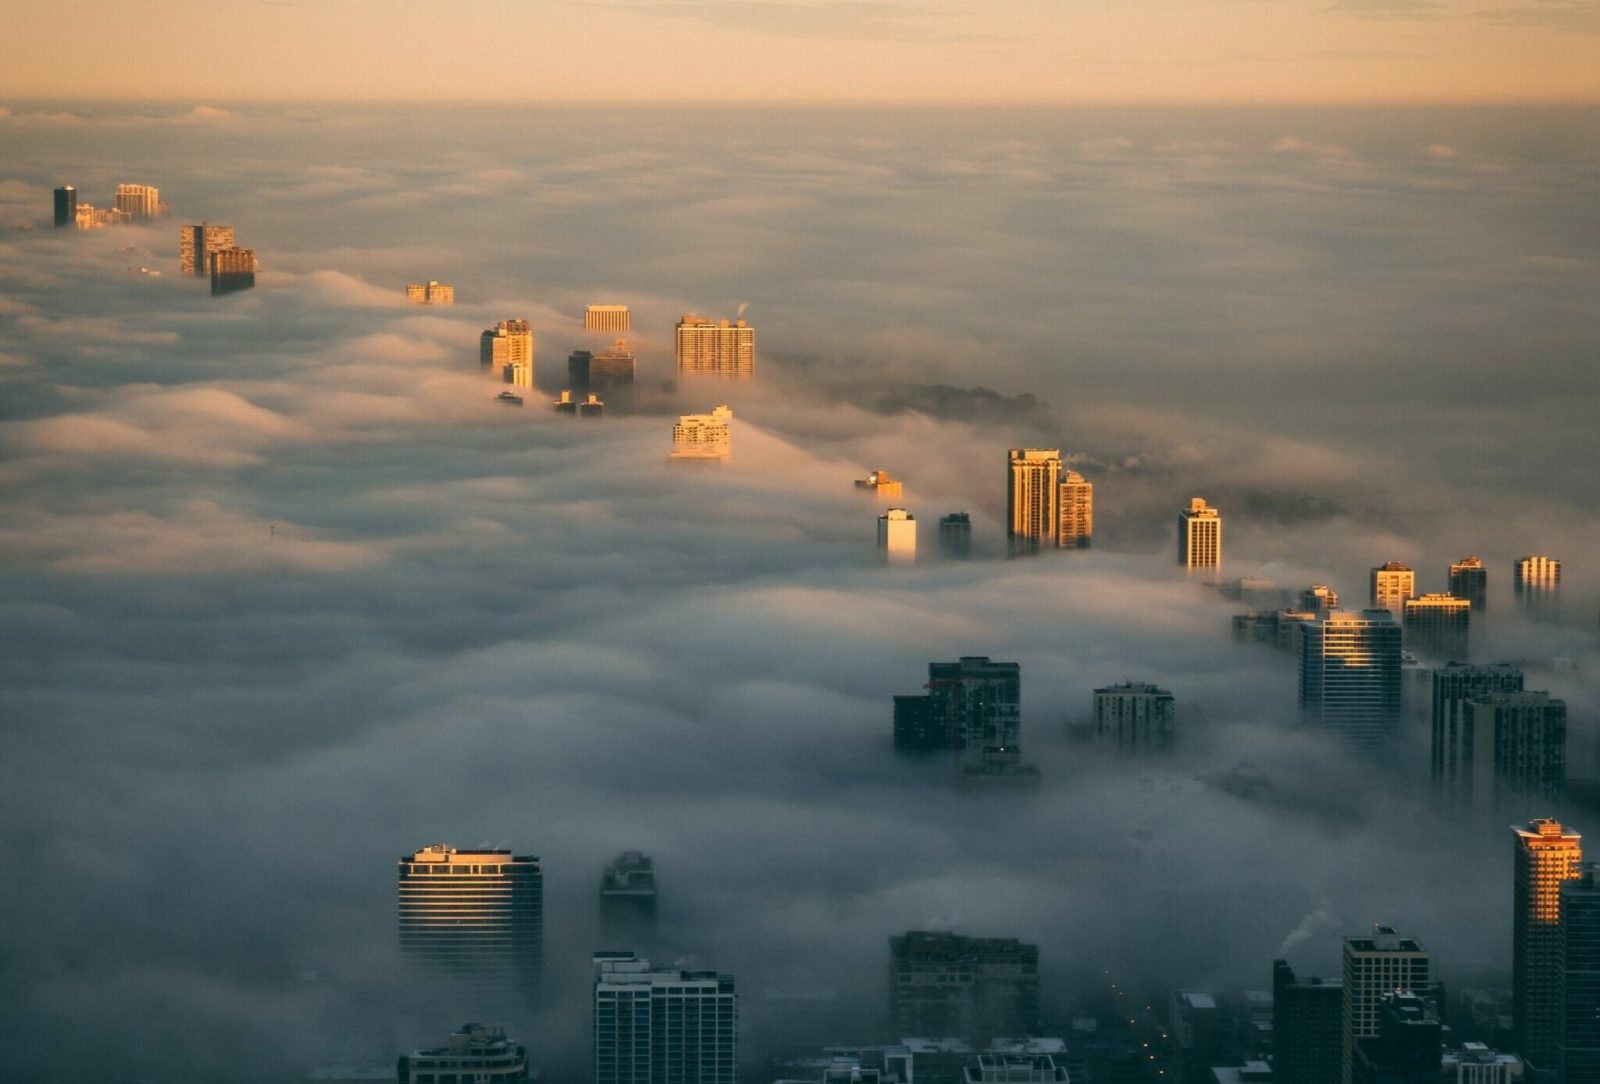 View from above of a city skyline at sunrise with a layer of fog adding a moody tone